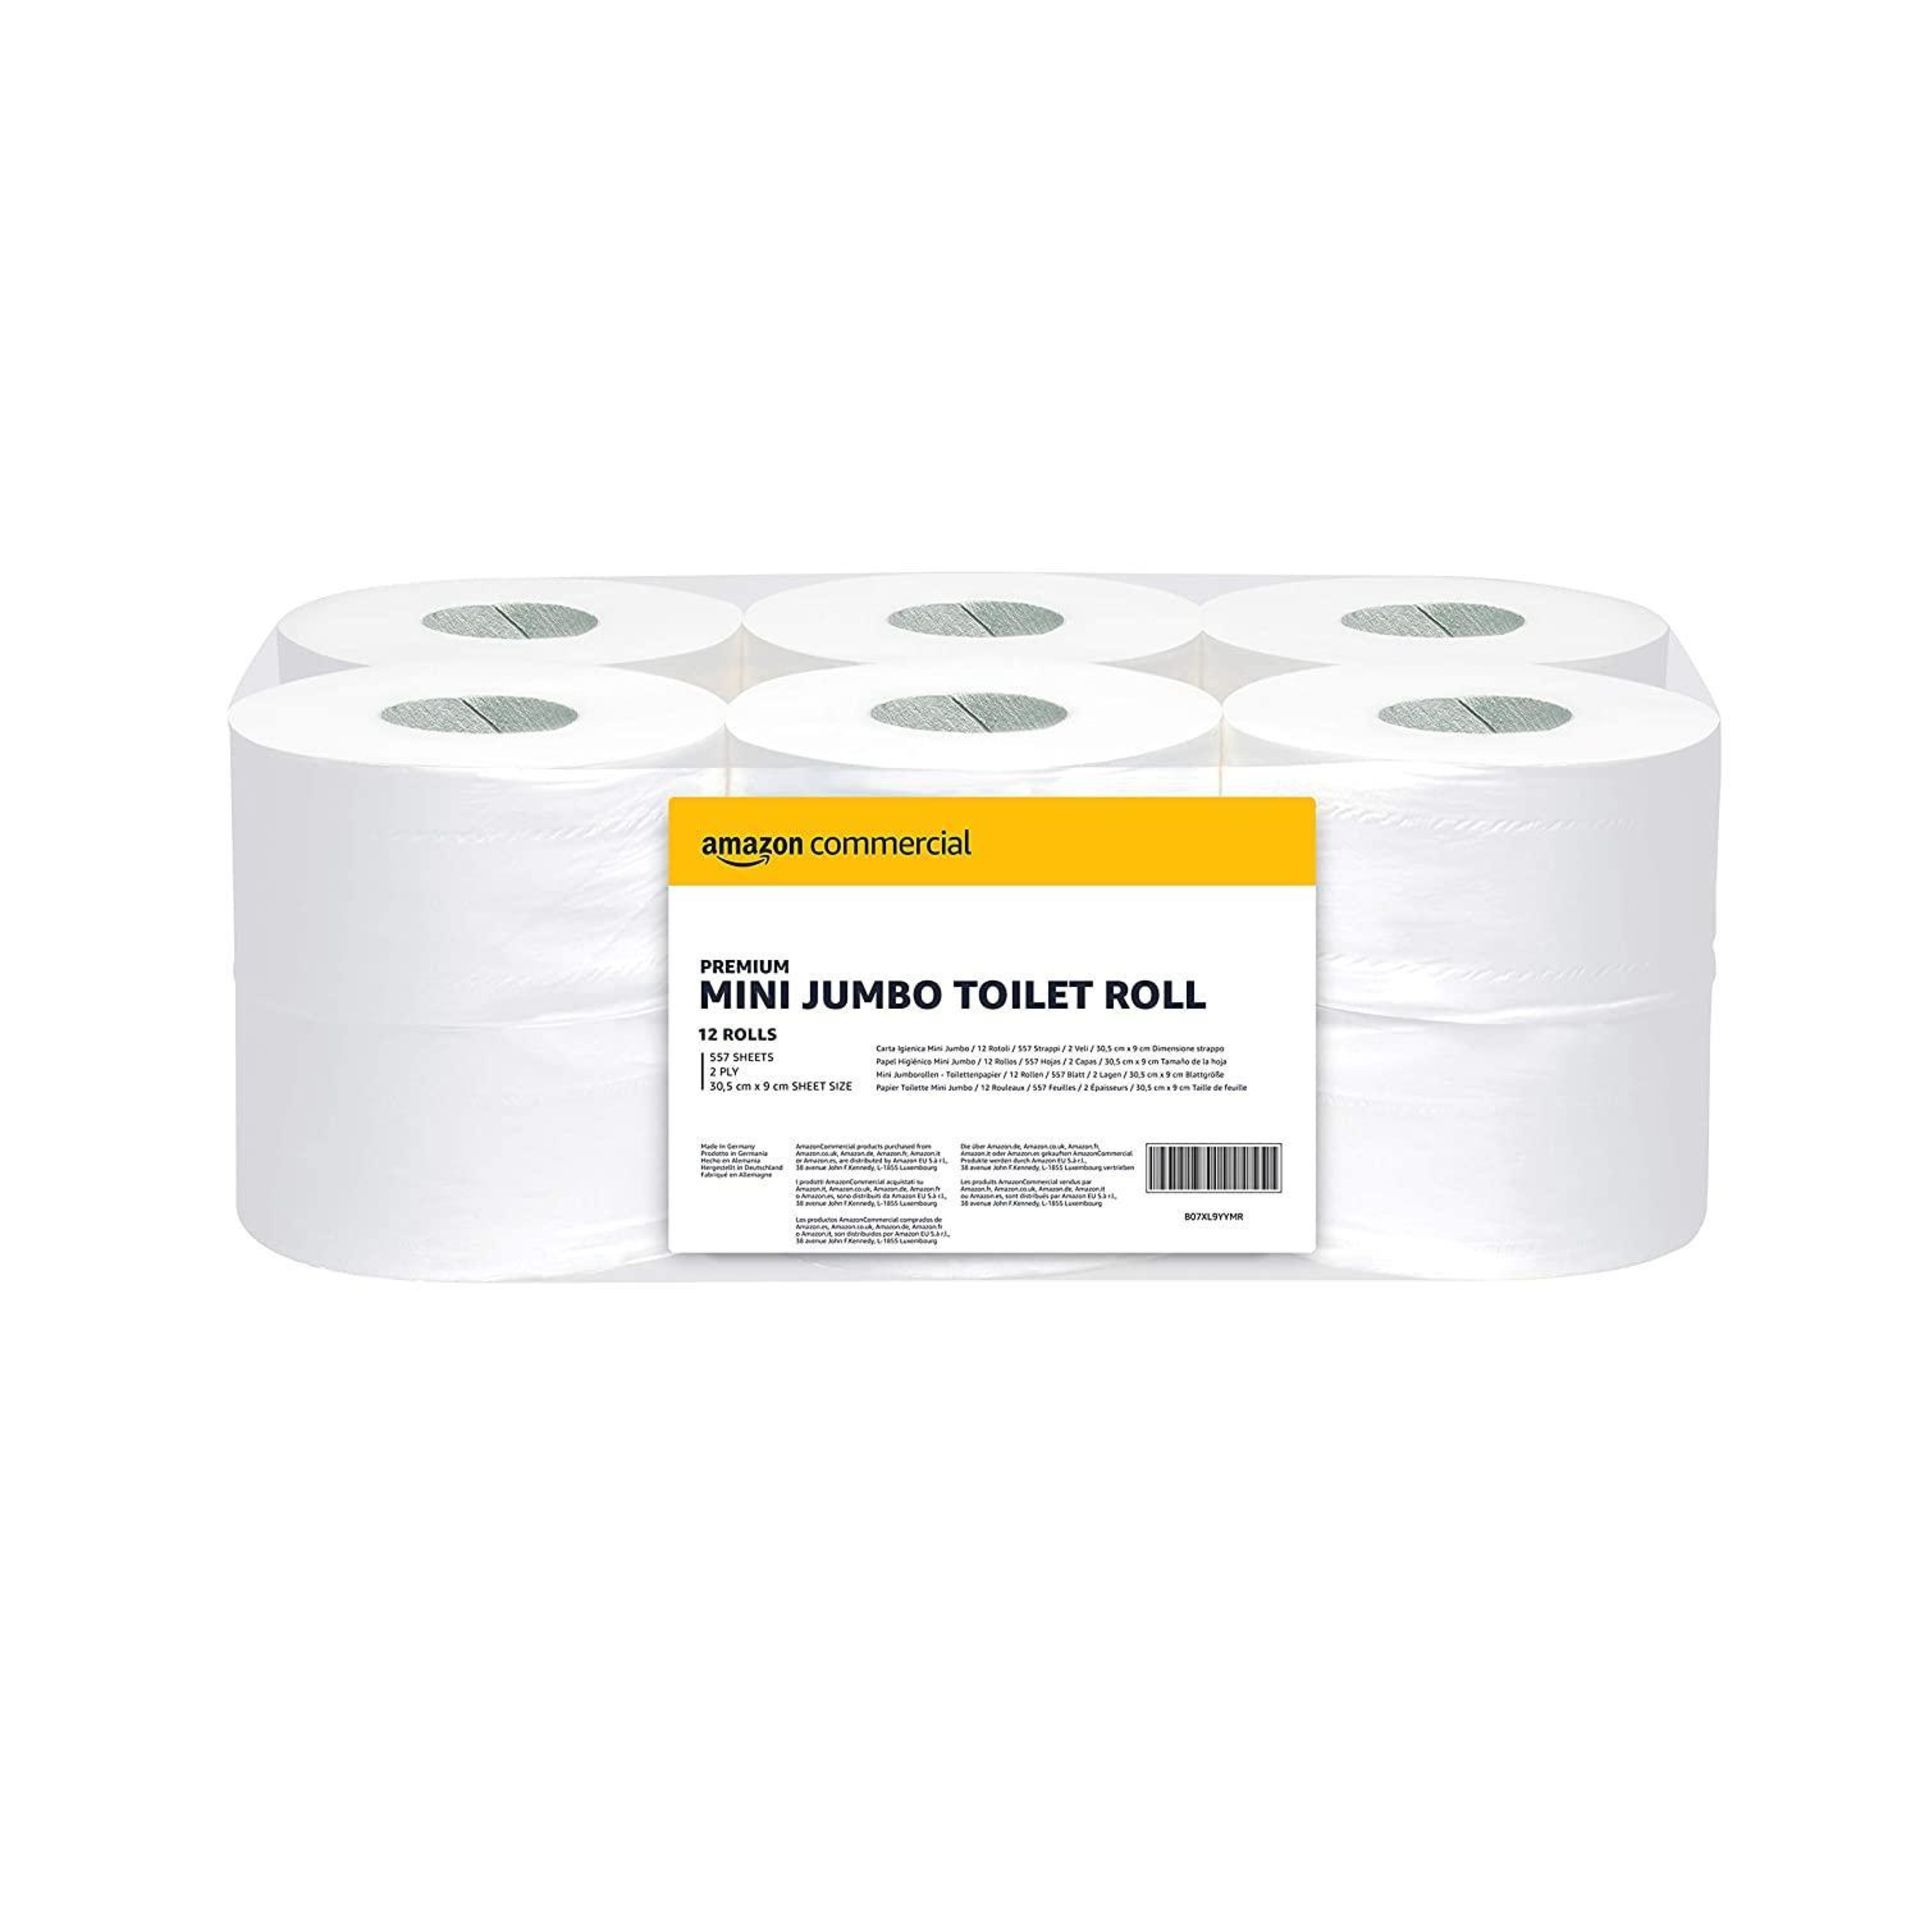 Amazon Commercial Mini Jumbo Toilet Roll 2 PLY Pack of 12 Rolls (557 Sheets/Roll)(416647) £15.99 RRP